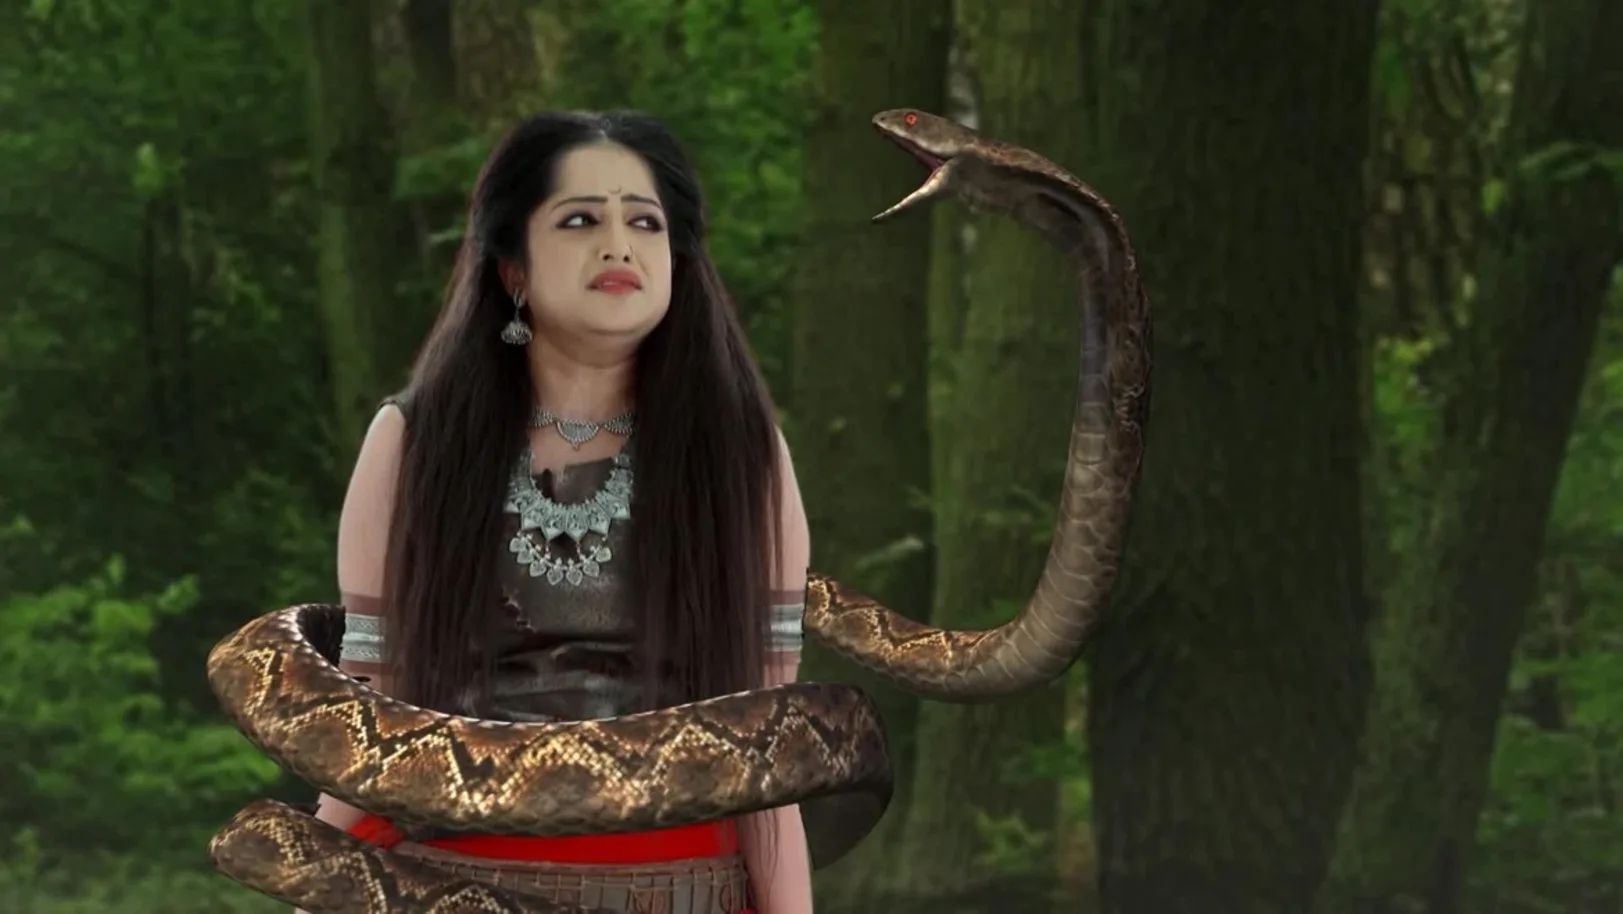 A snake tries to harm Parul - Saat Bhai Champa Highlights 